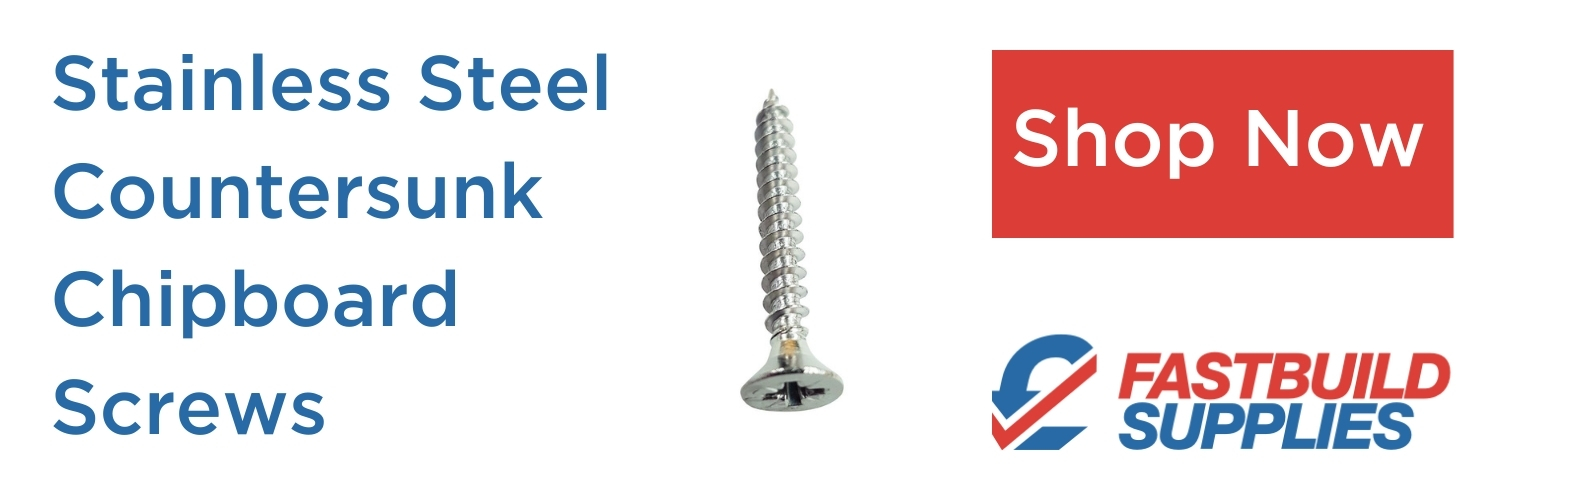 Stainless Steel Countersunk Chipboard Screws by Fastbuild